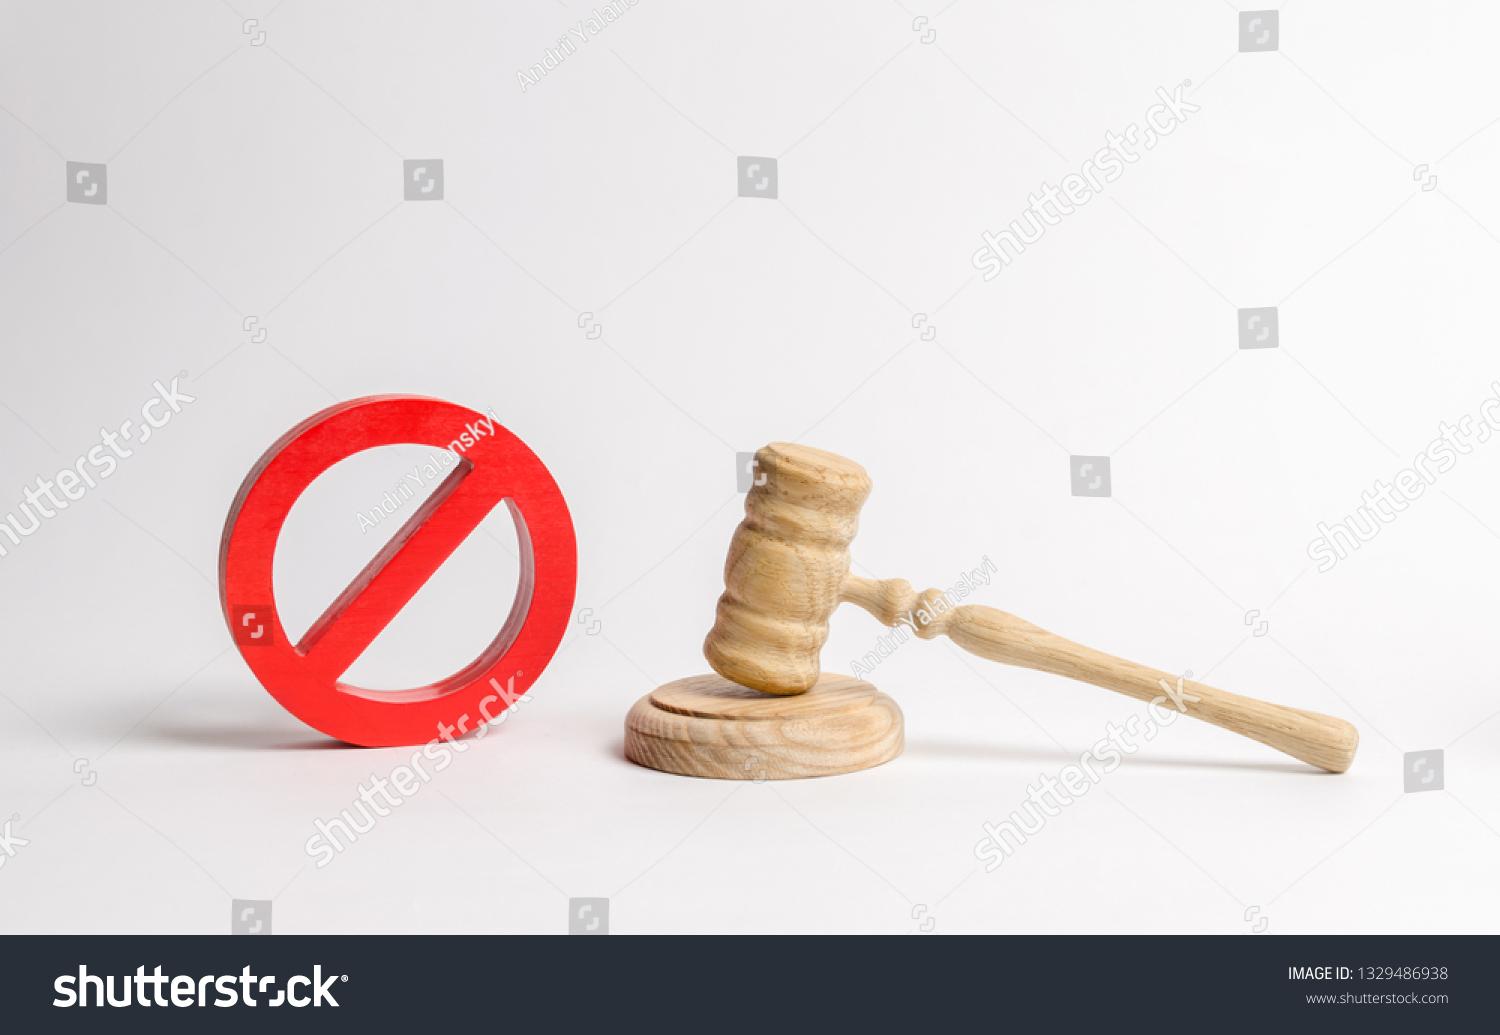 Judge's gavel and NO symbol. The concept of prohibiting and restrictive laws. Prohibitions and criminalization, repression, restriction of freedoms and rights of people and citizens. #1329486938